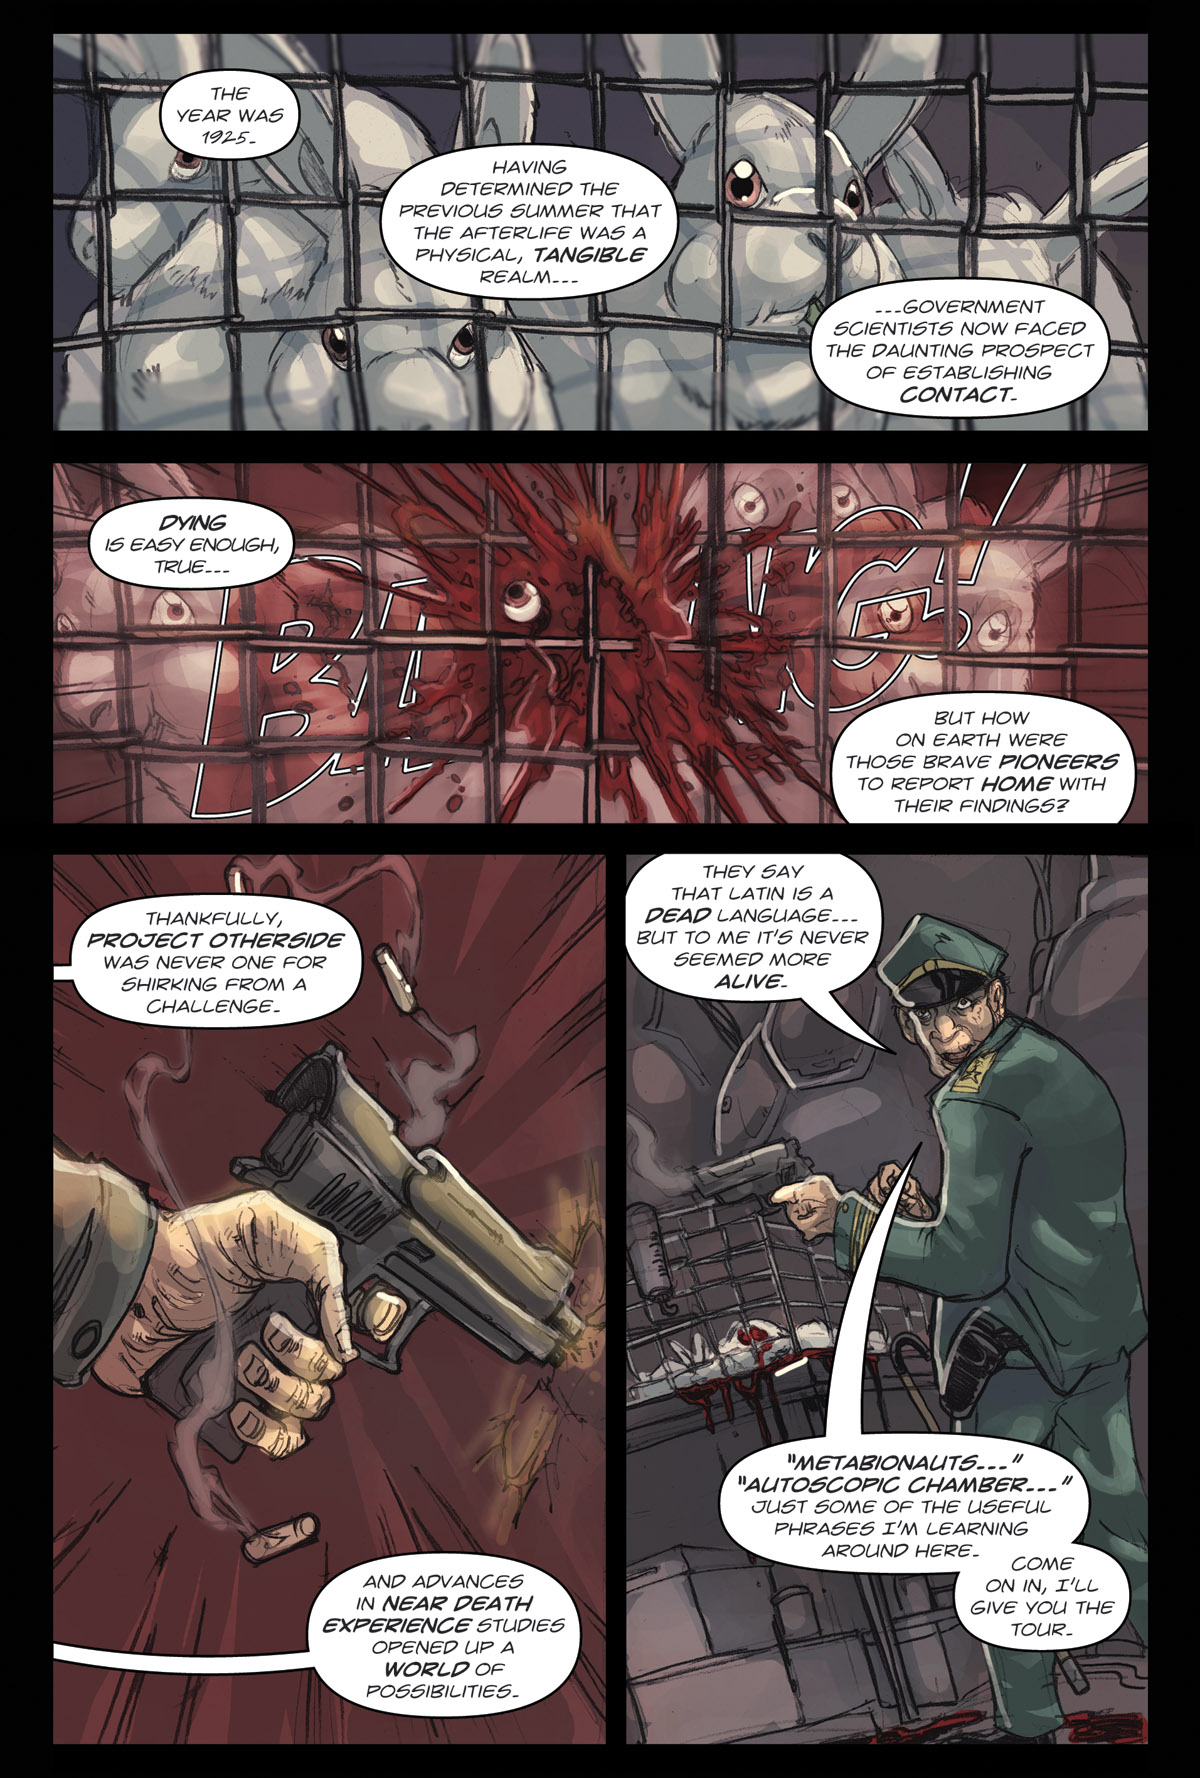 Afterlife Inc. | Near Life | Page 9